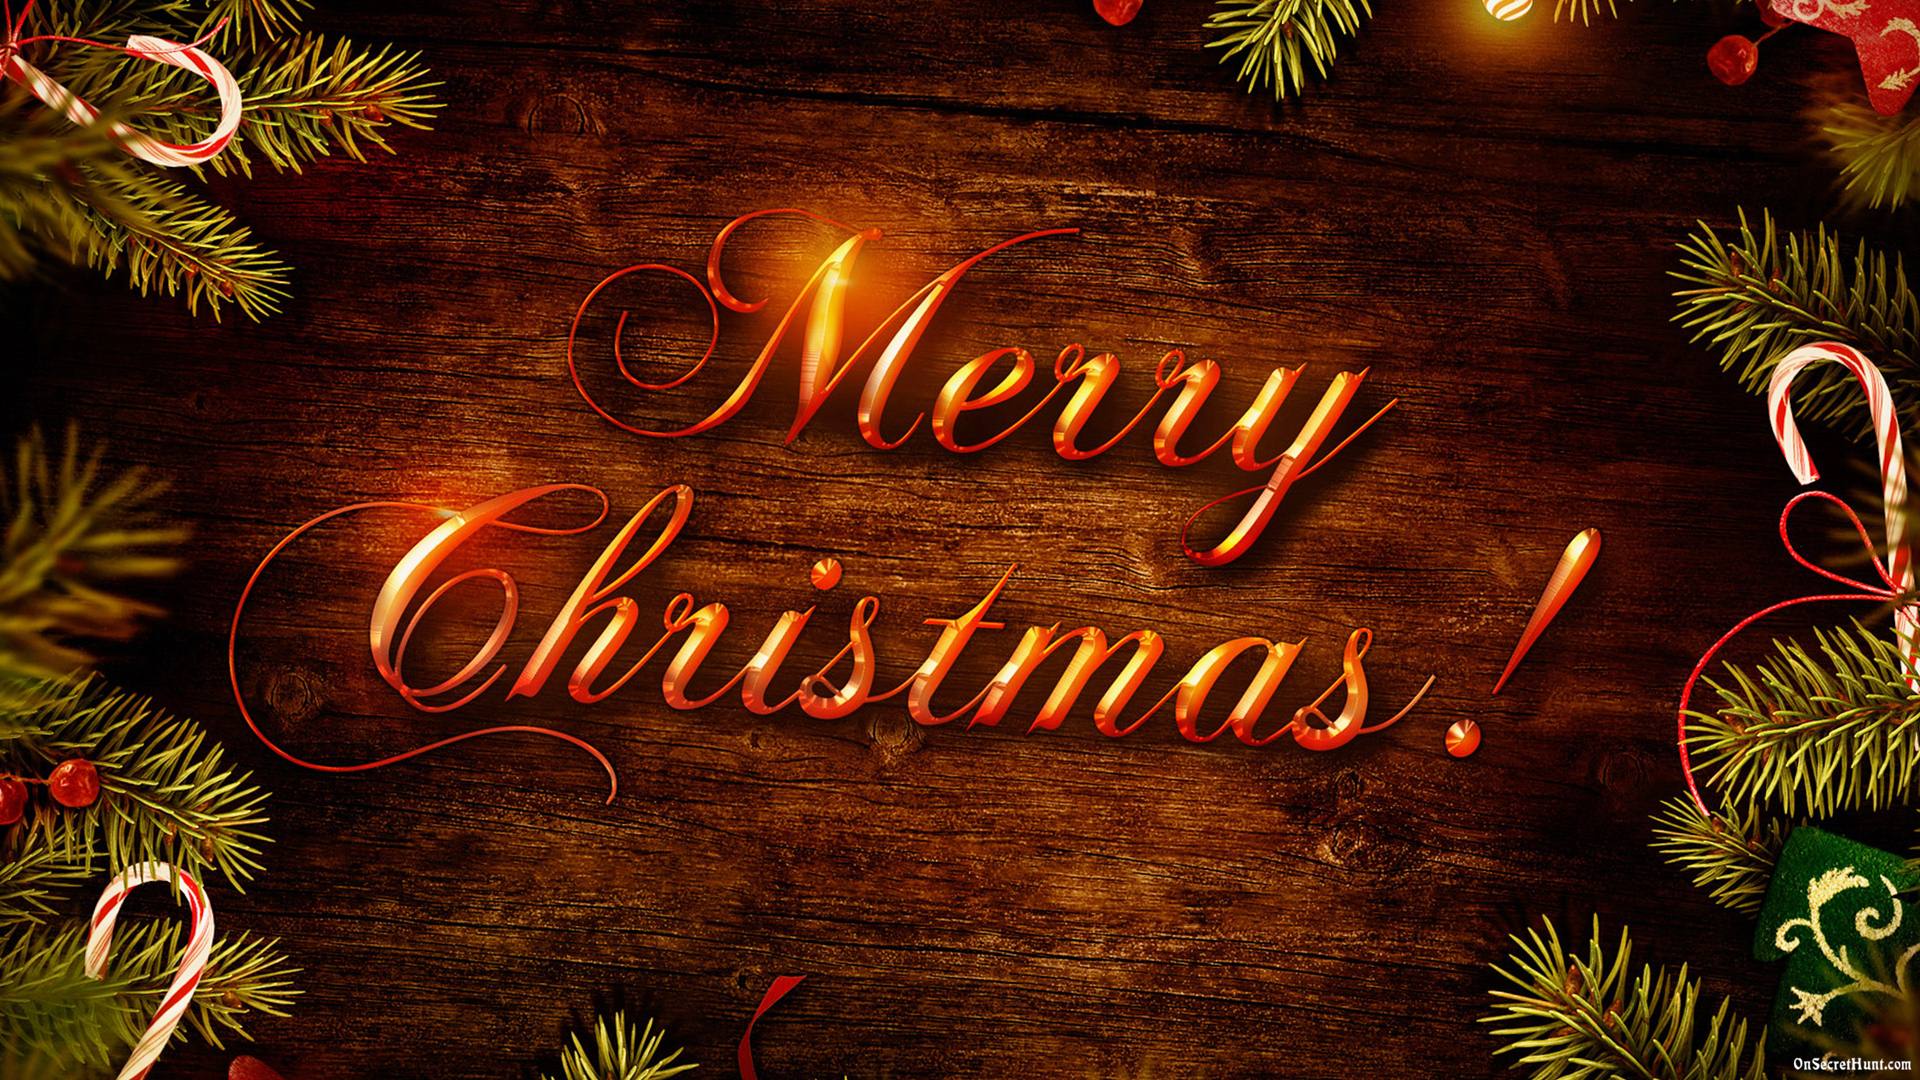 Merry Christmas Wishes Wallpapers funny pics